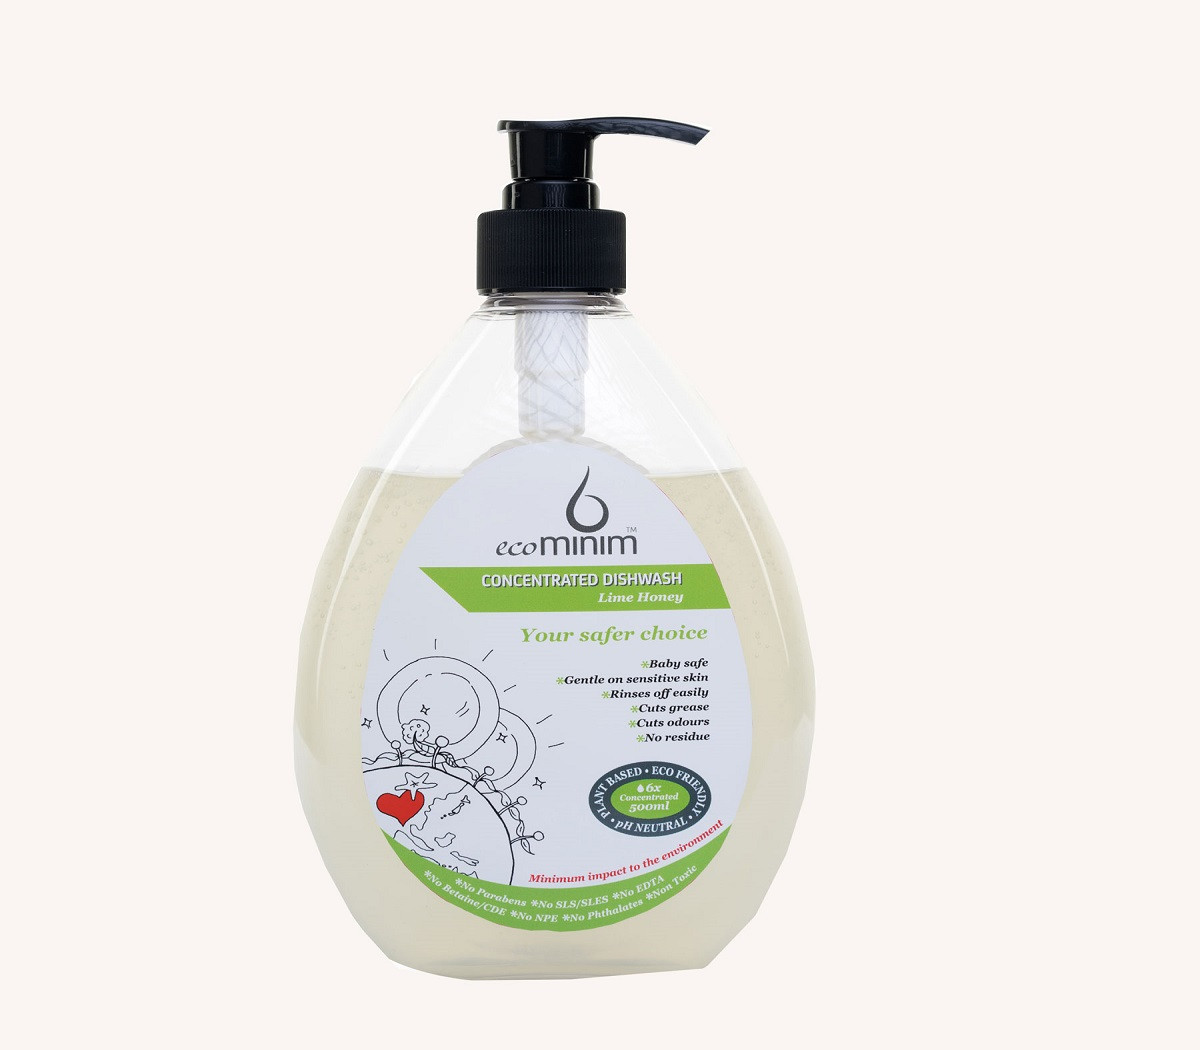 Safer Choice Concentrated Dish Wash Liquid - Lime Honey